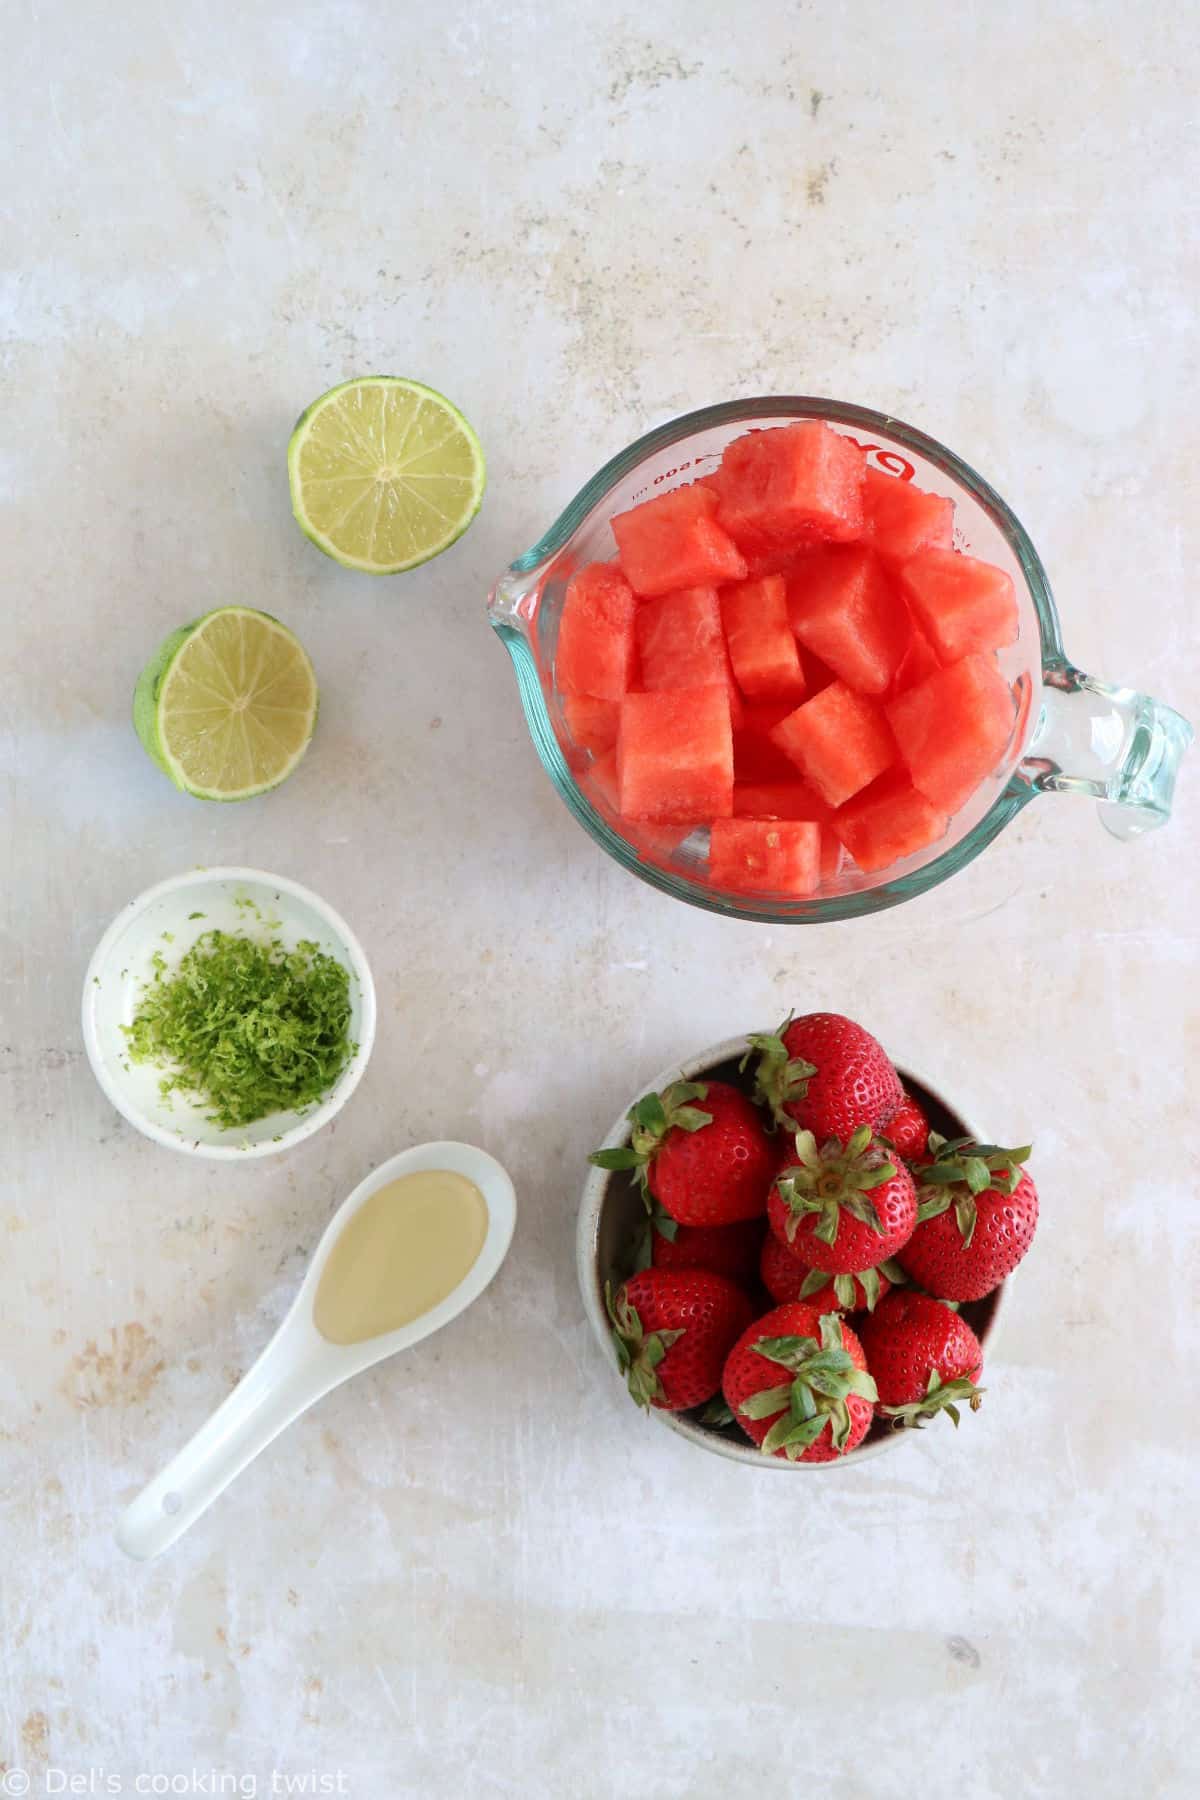 These watermelon popsicles are game-changing. With just 4 simple ingredients and a blender, you get a healthy, fruity, and refreshing summer treat that is also naturally vegan.